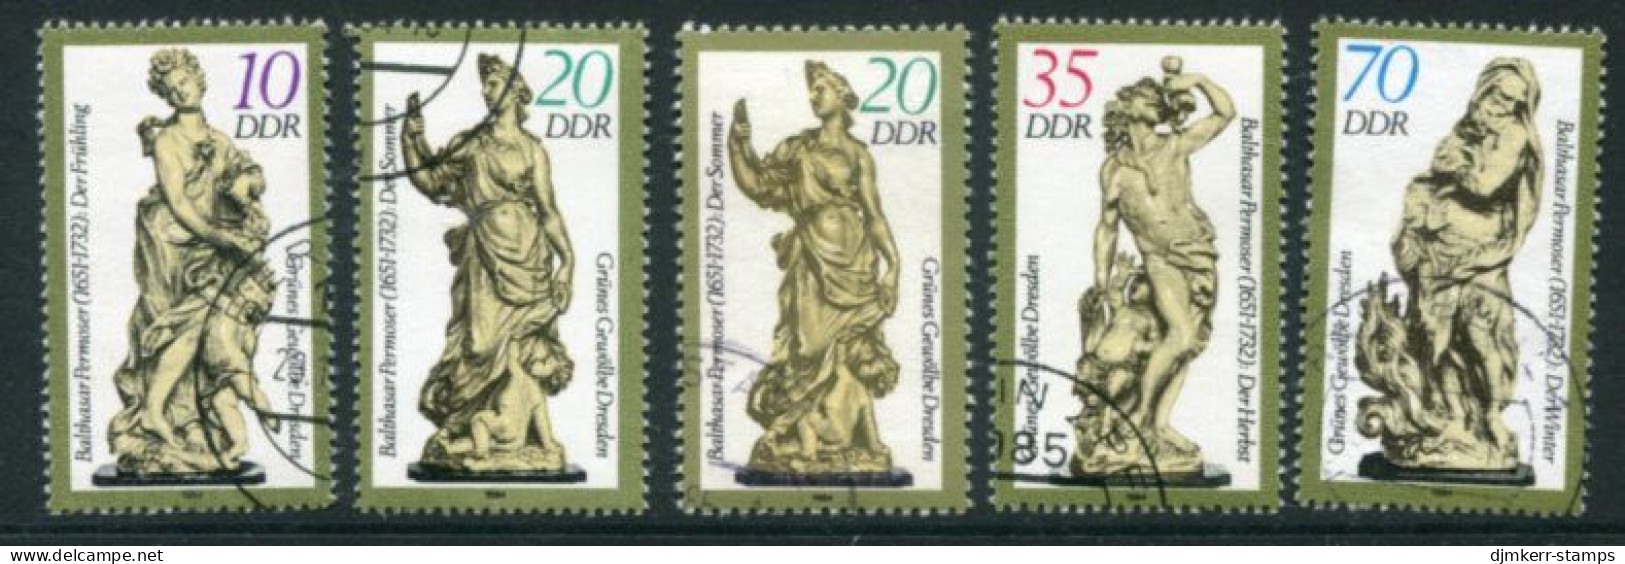 DDR 1984 Statues From The Green Vault With Both 20 Pf. Used.  Michel 2905-08 - Gebruikt